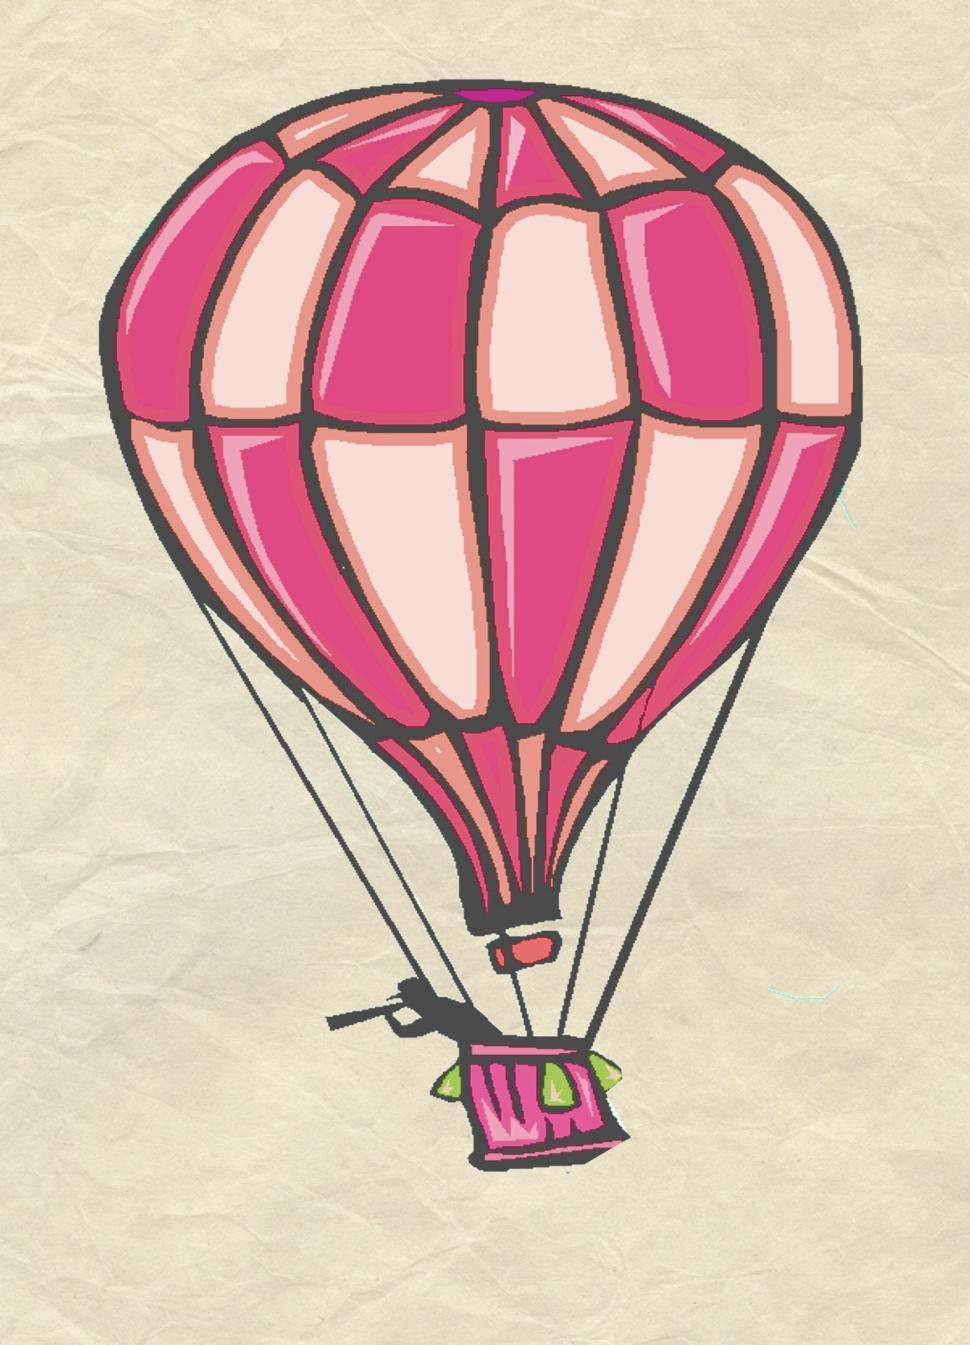 Free Image of Hot Air Balloon Flying in the Sky 